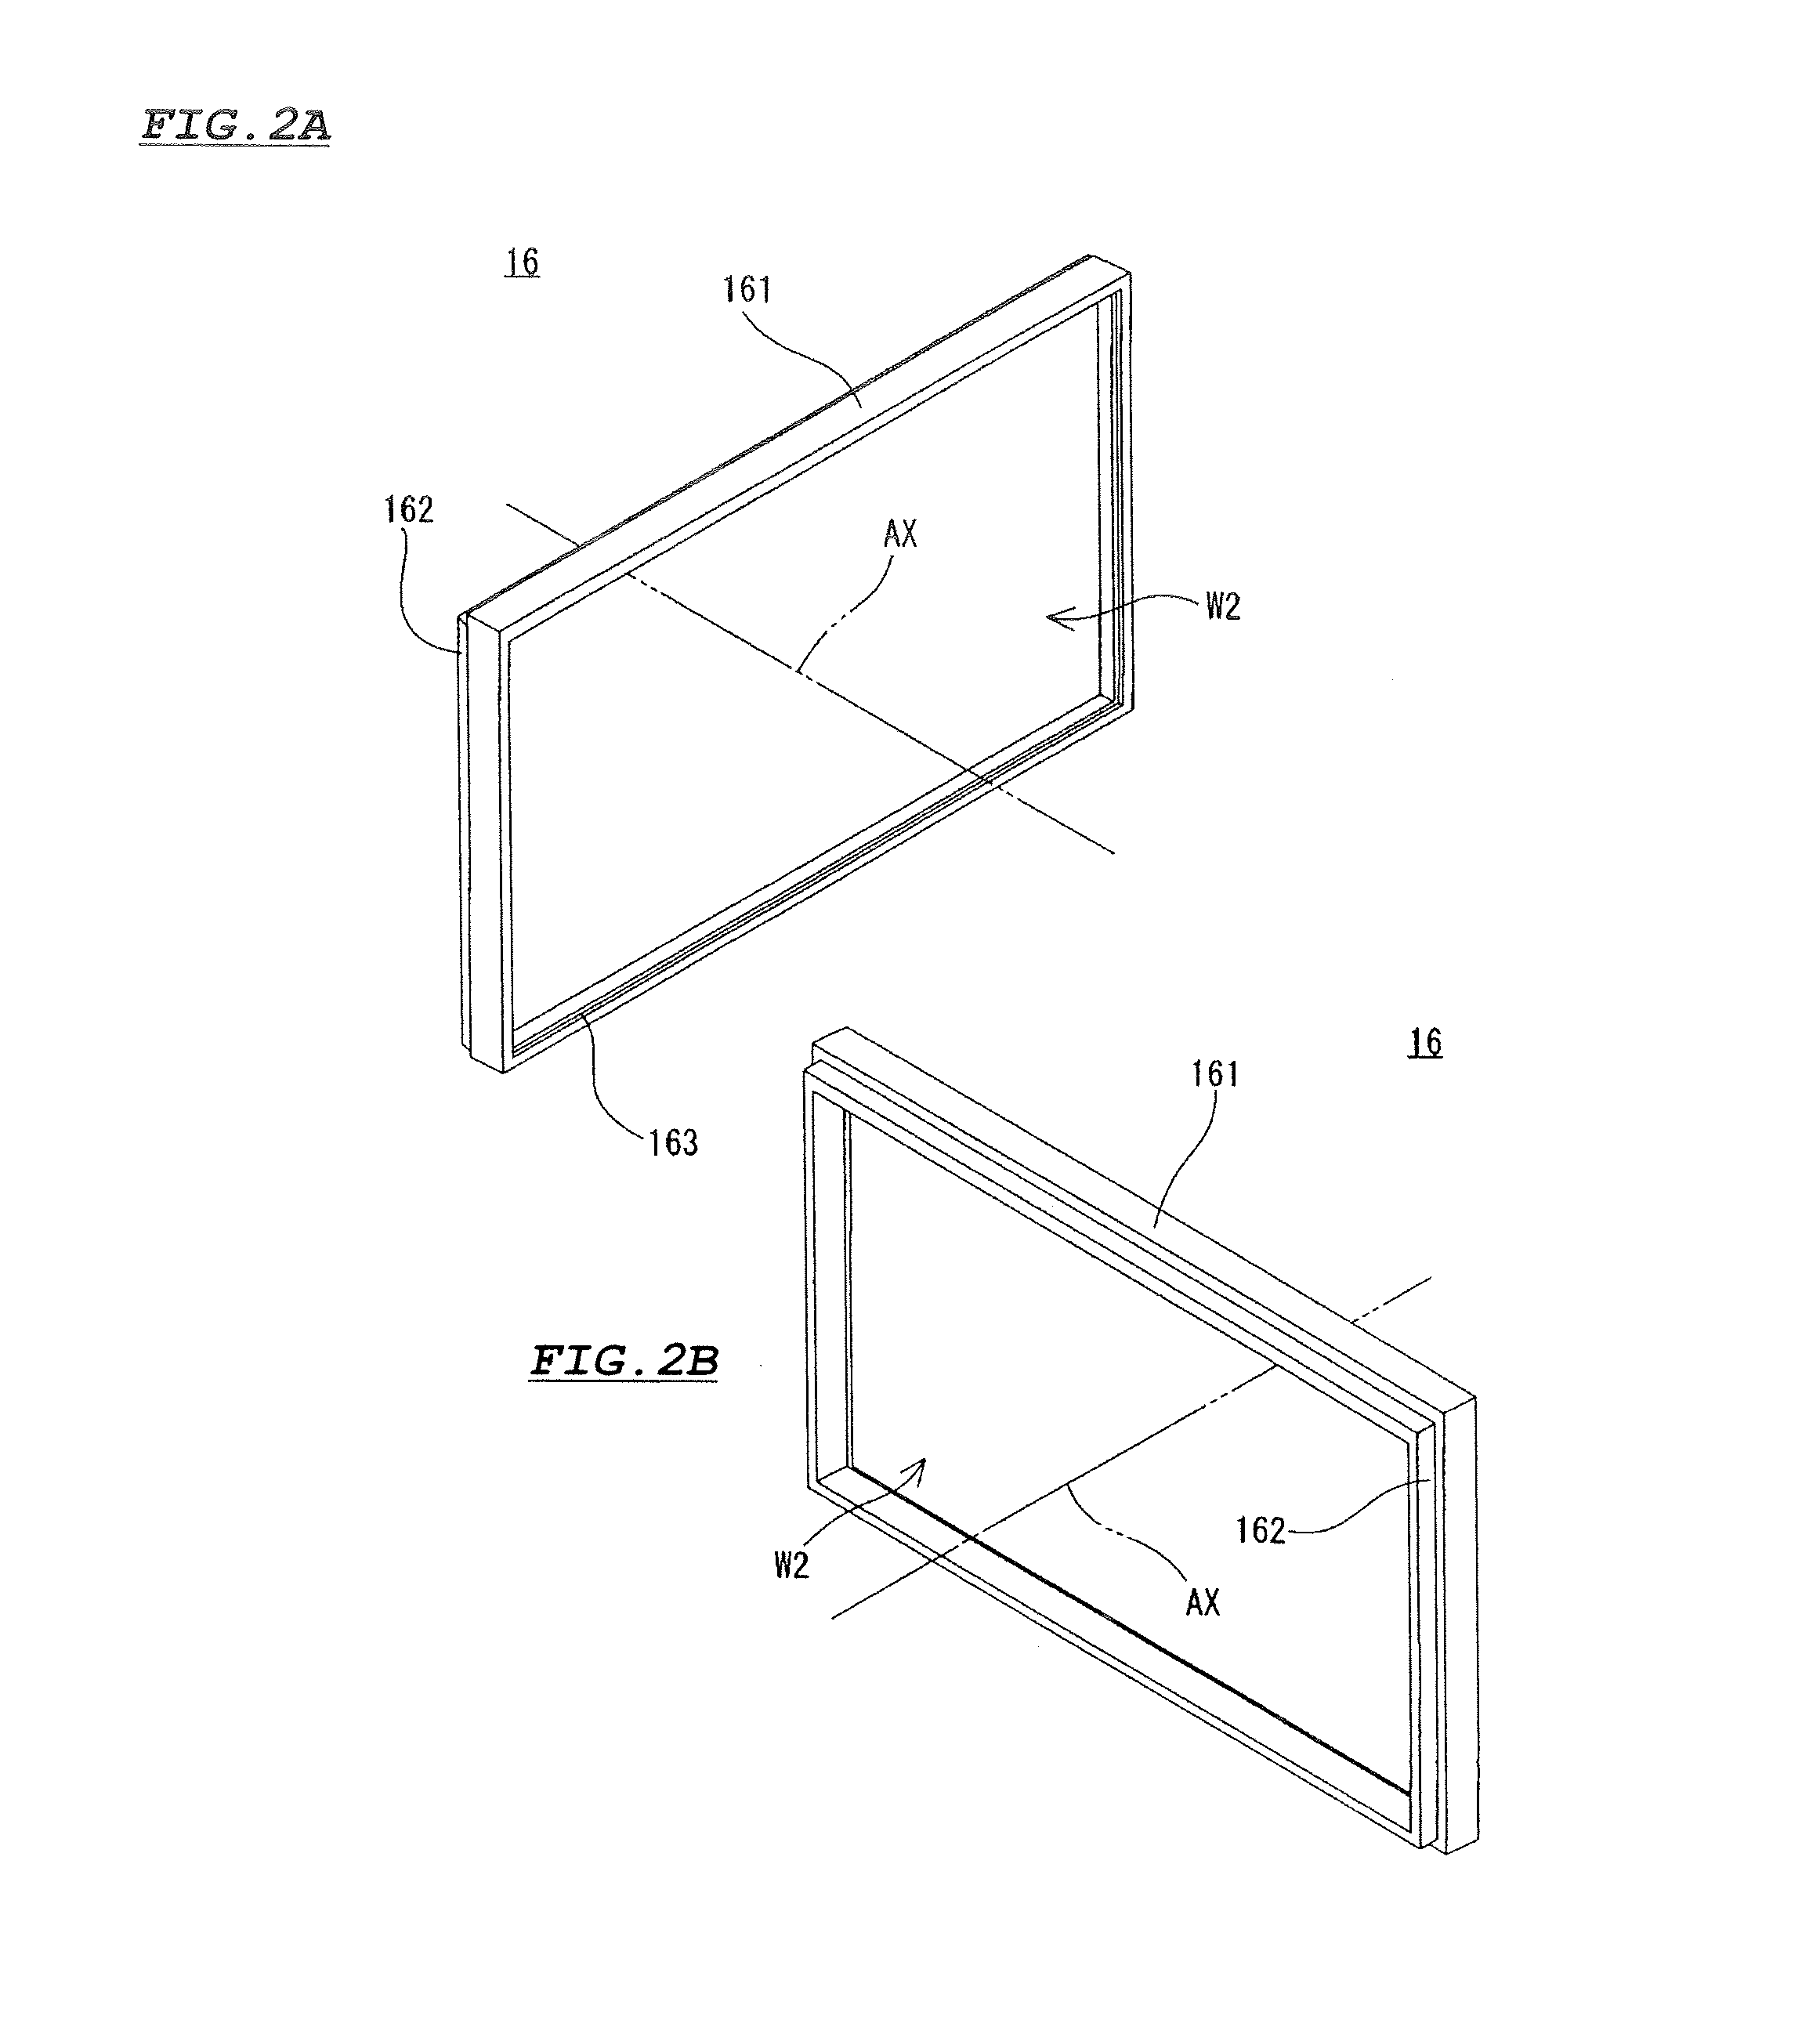 Liquid crystal display device and apparatus with display function